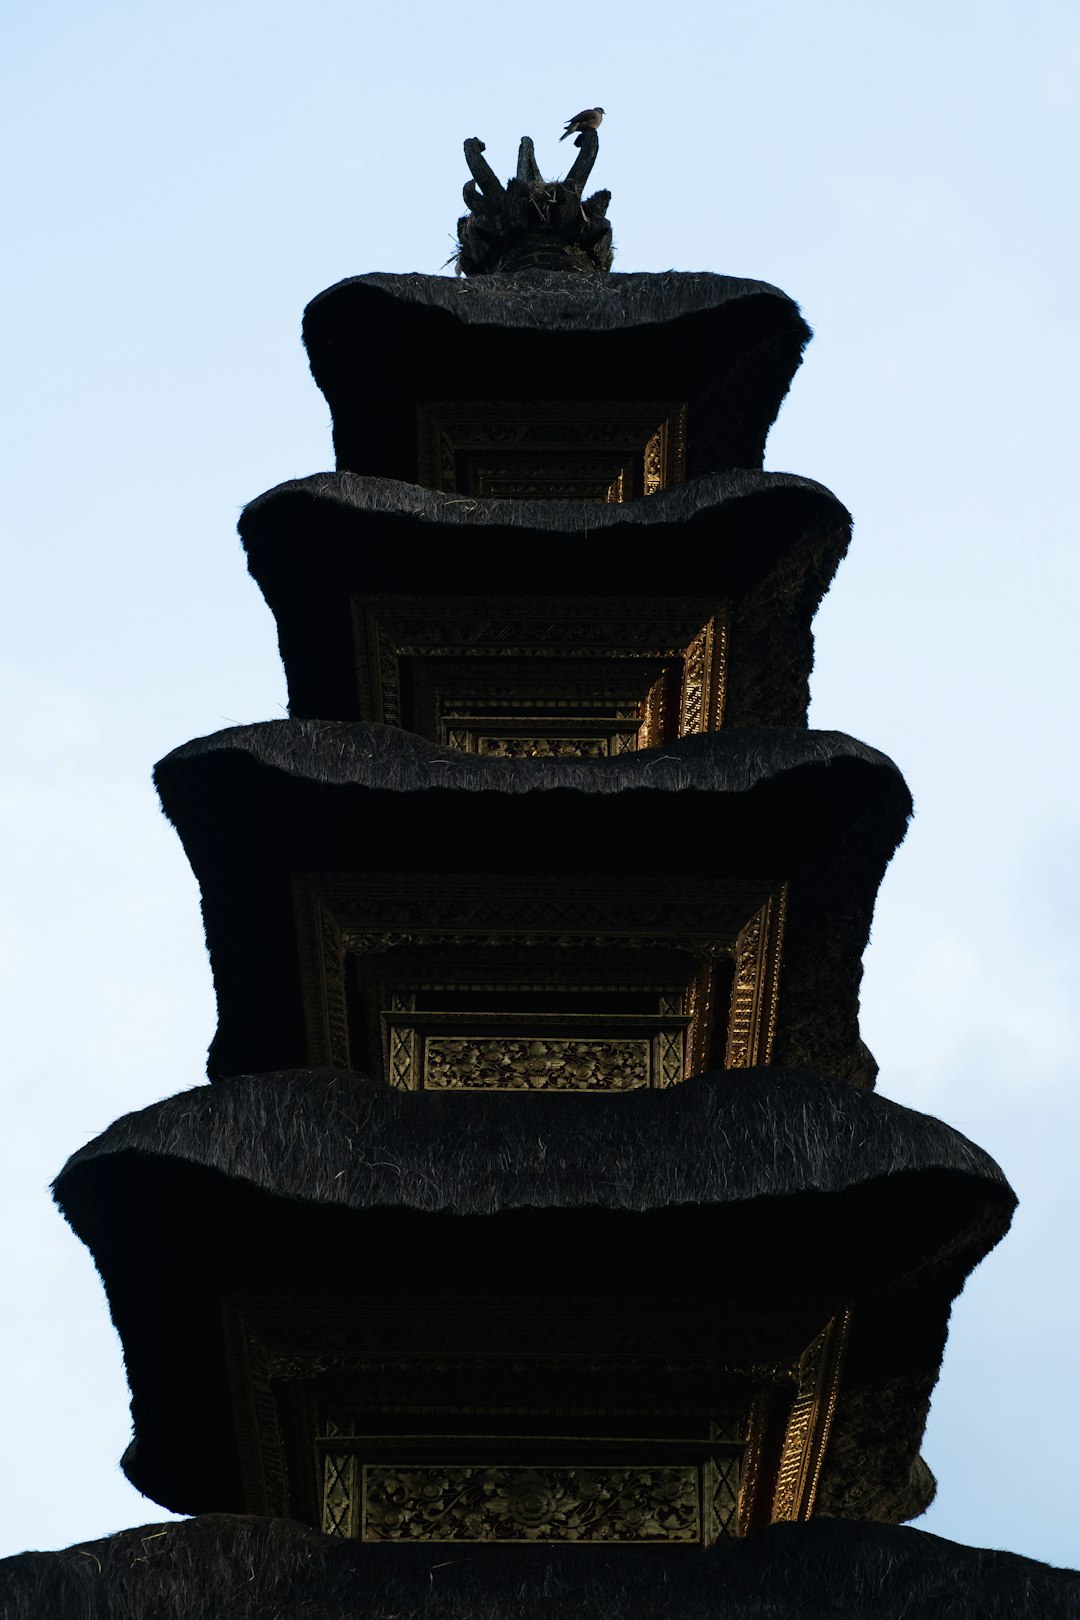 travelers stories about Pagoda in Ubud, Indonesia